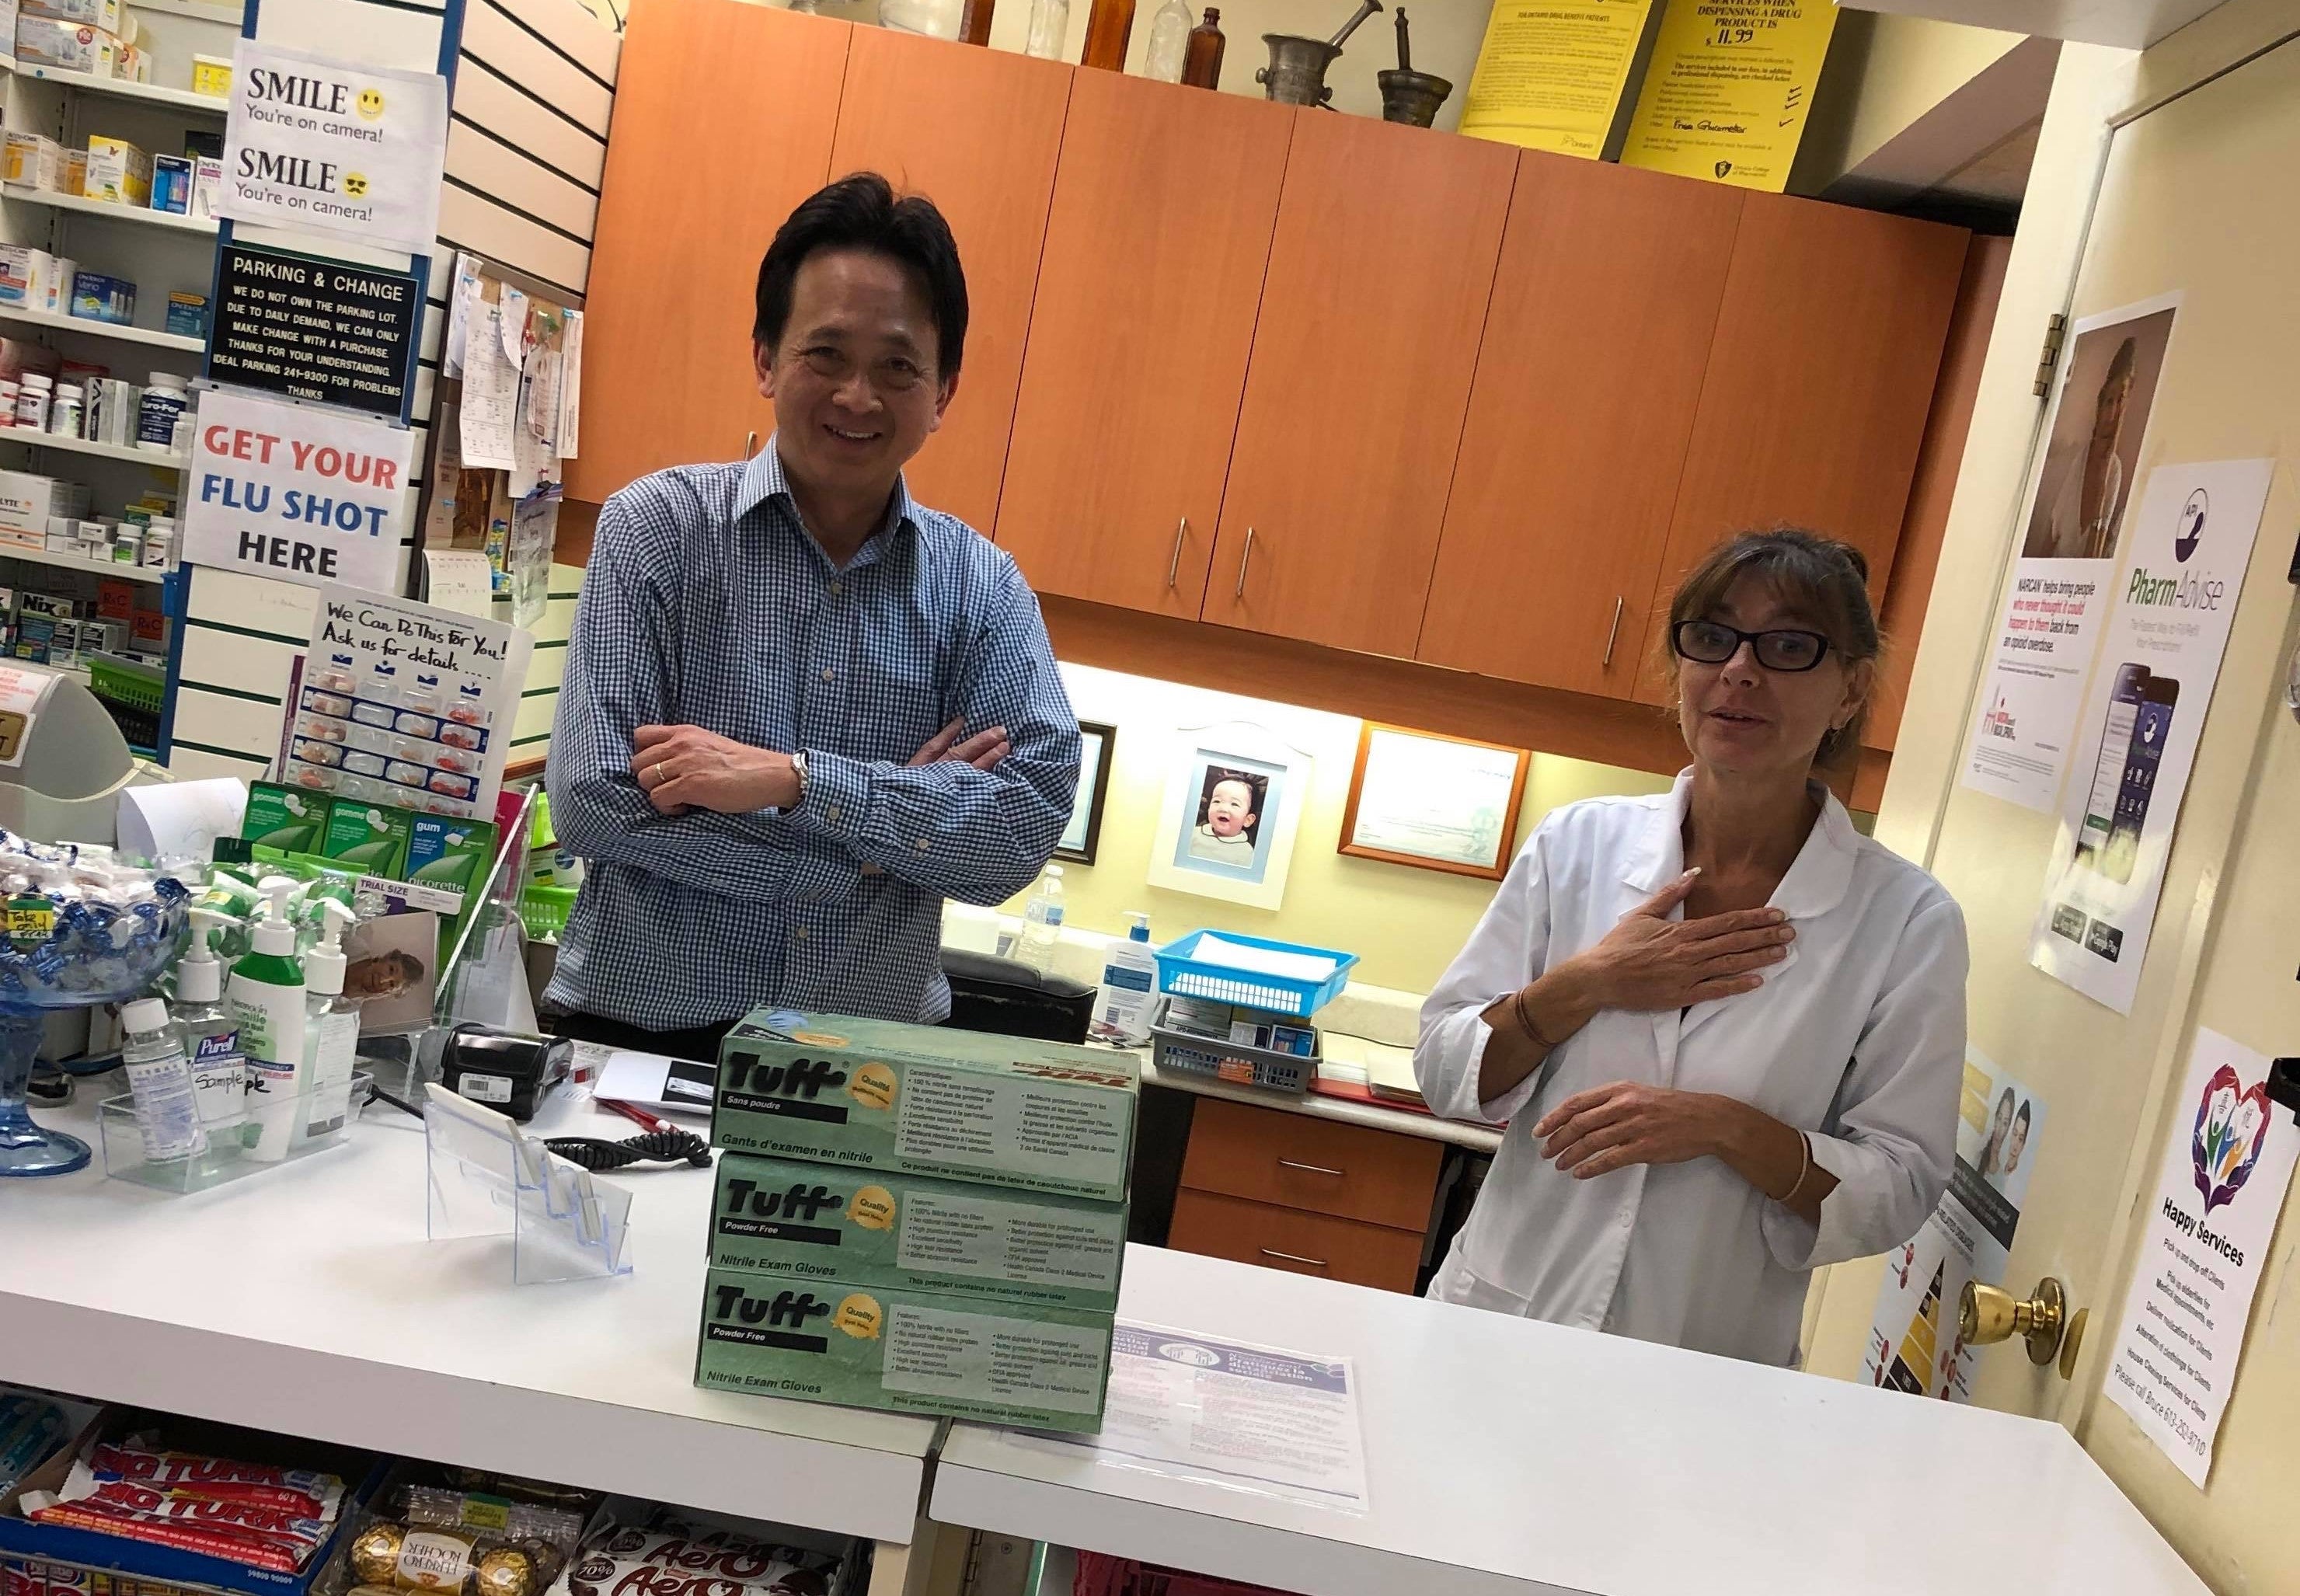 A man and woman standing behind a pharmacy counter smiling as they recieve a donation